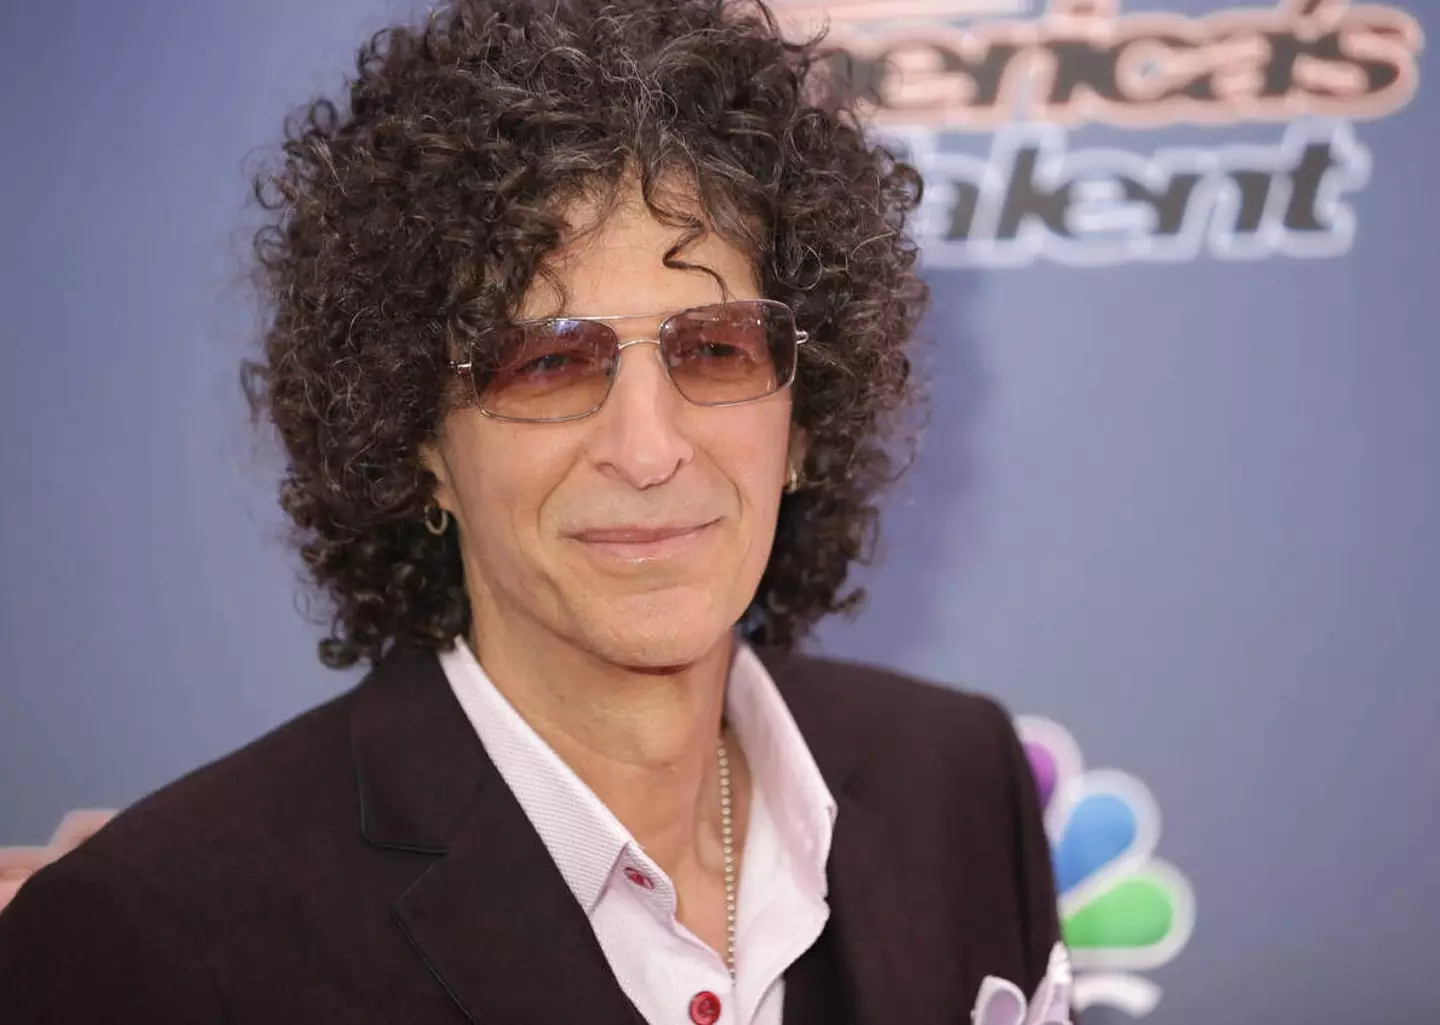 Howard Stern has weighed in on the situation.